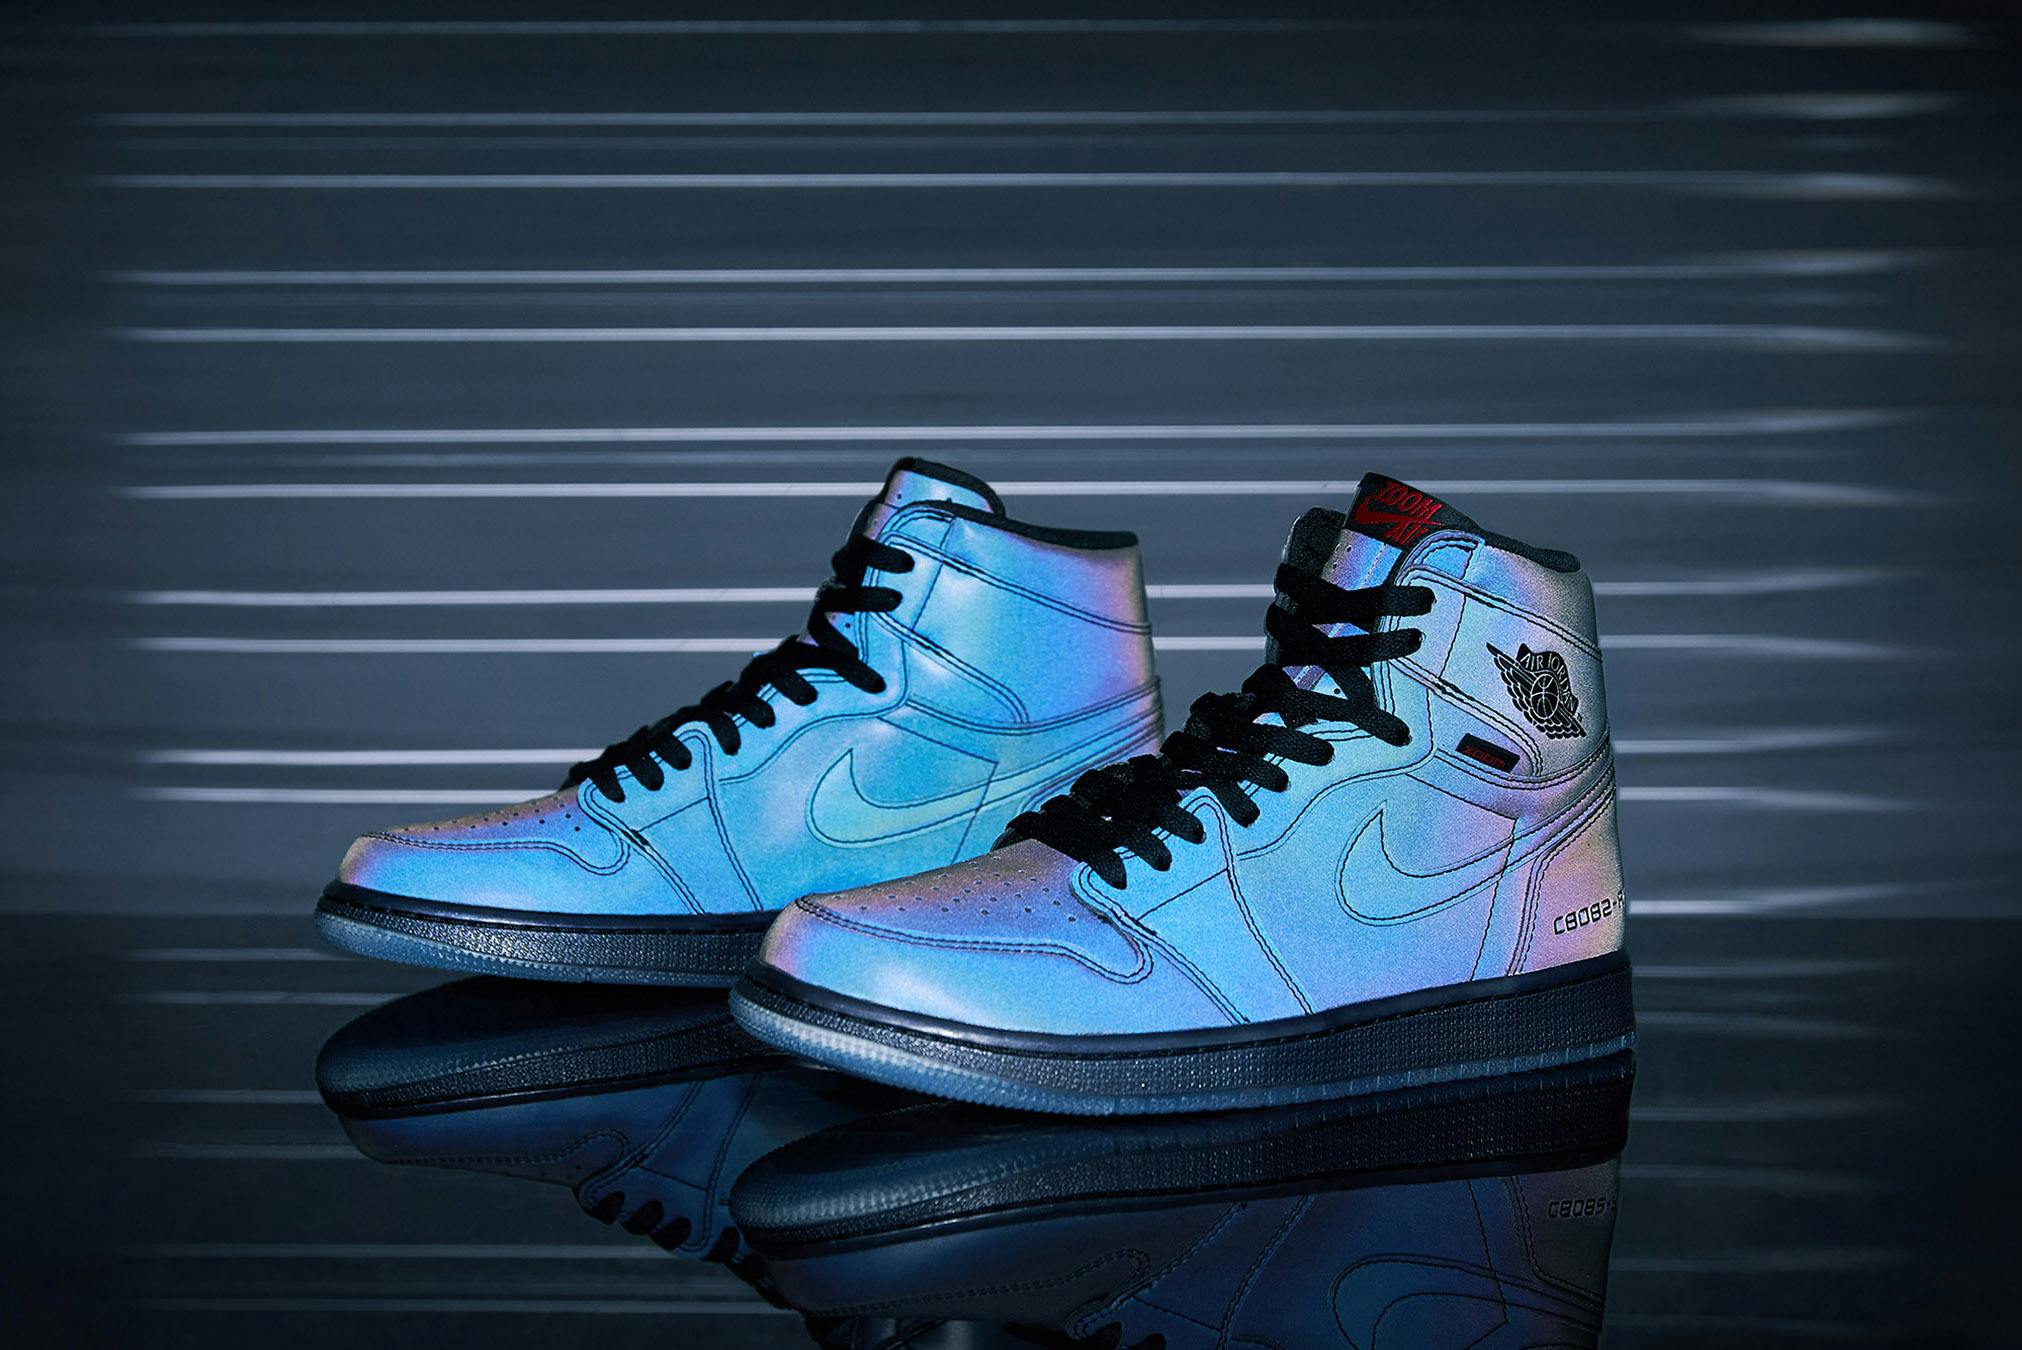 Air Jordan 1 High Zoom Fearless - Register Now on END. Launches | END.